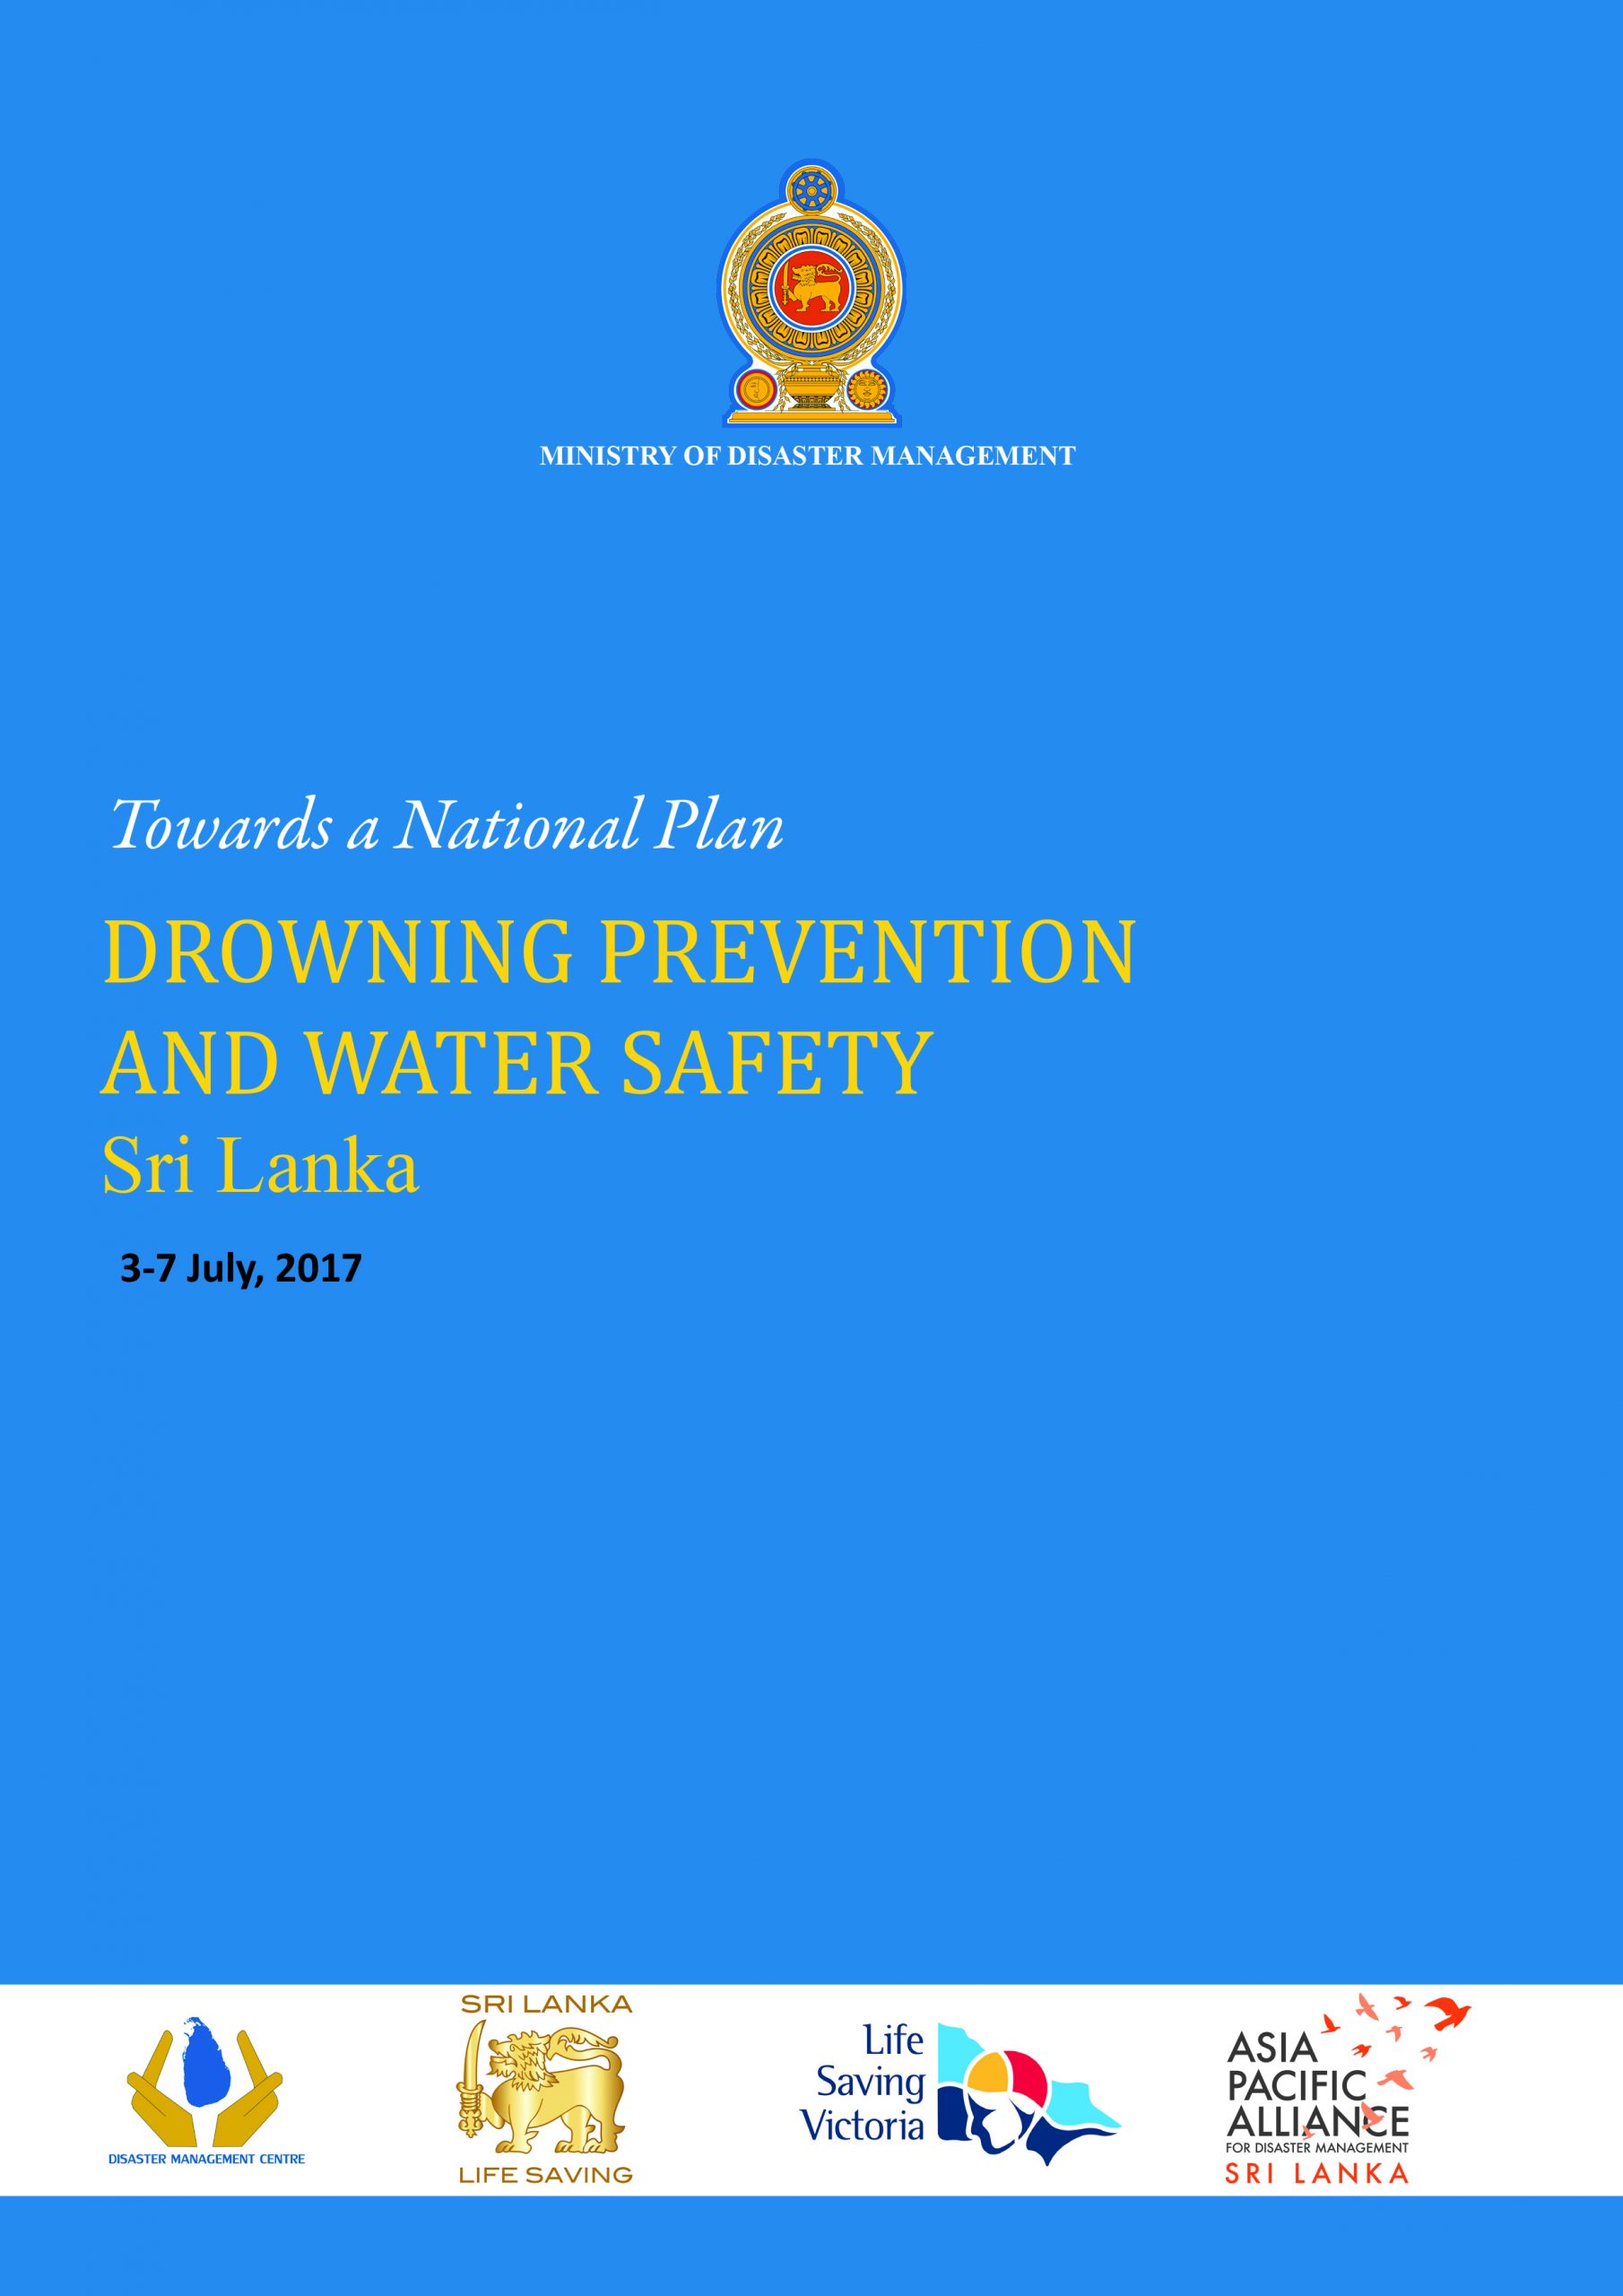 Towards a National Plan: Drowning Prevention & Water Safety, Sri Lanka Report